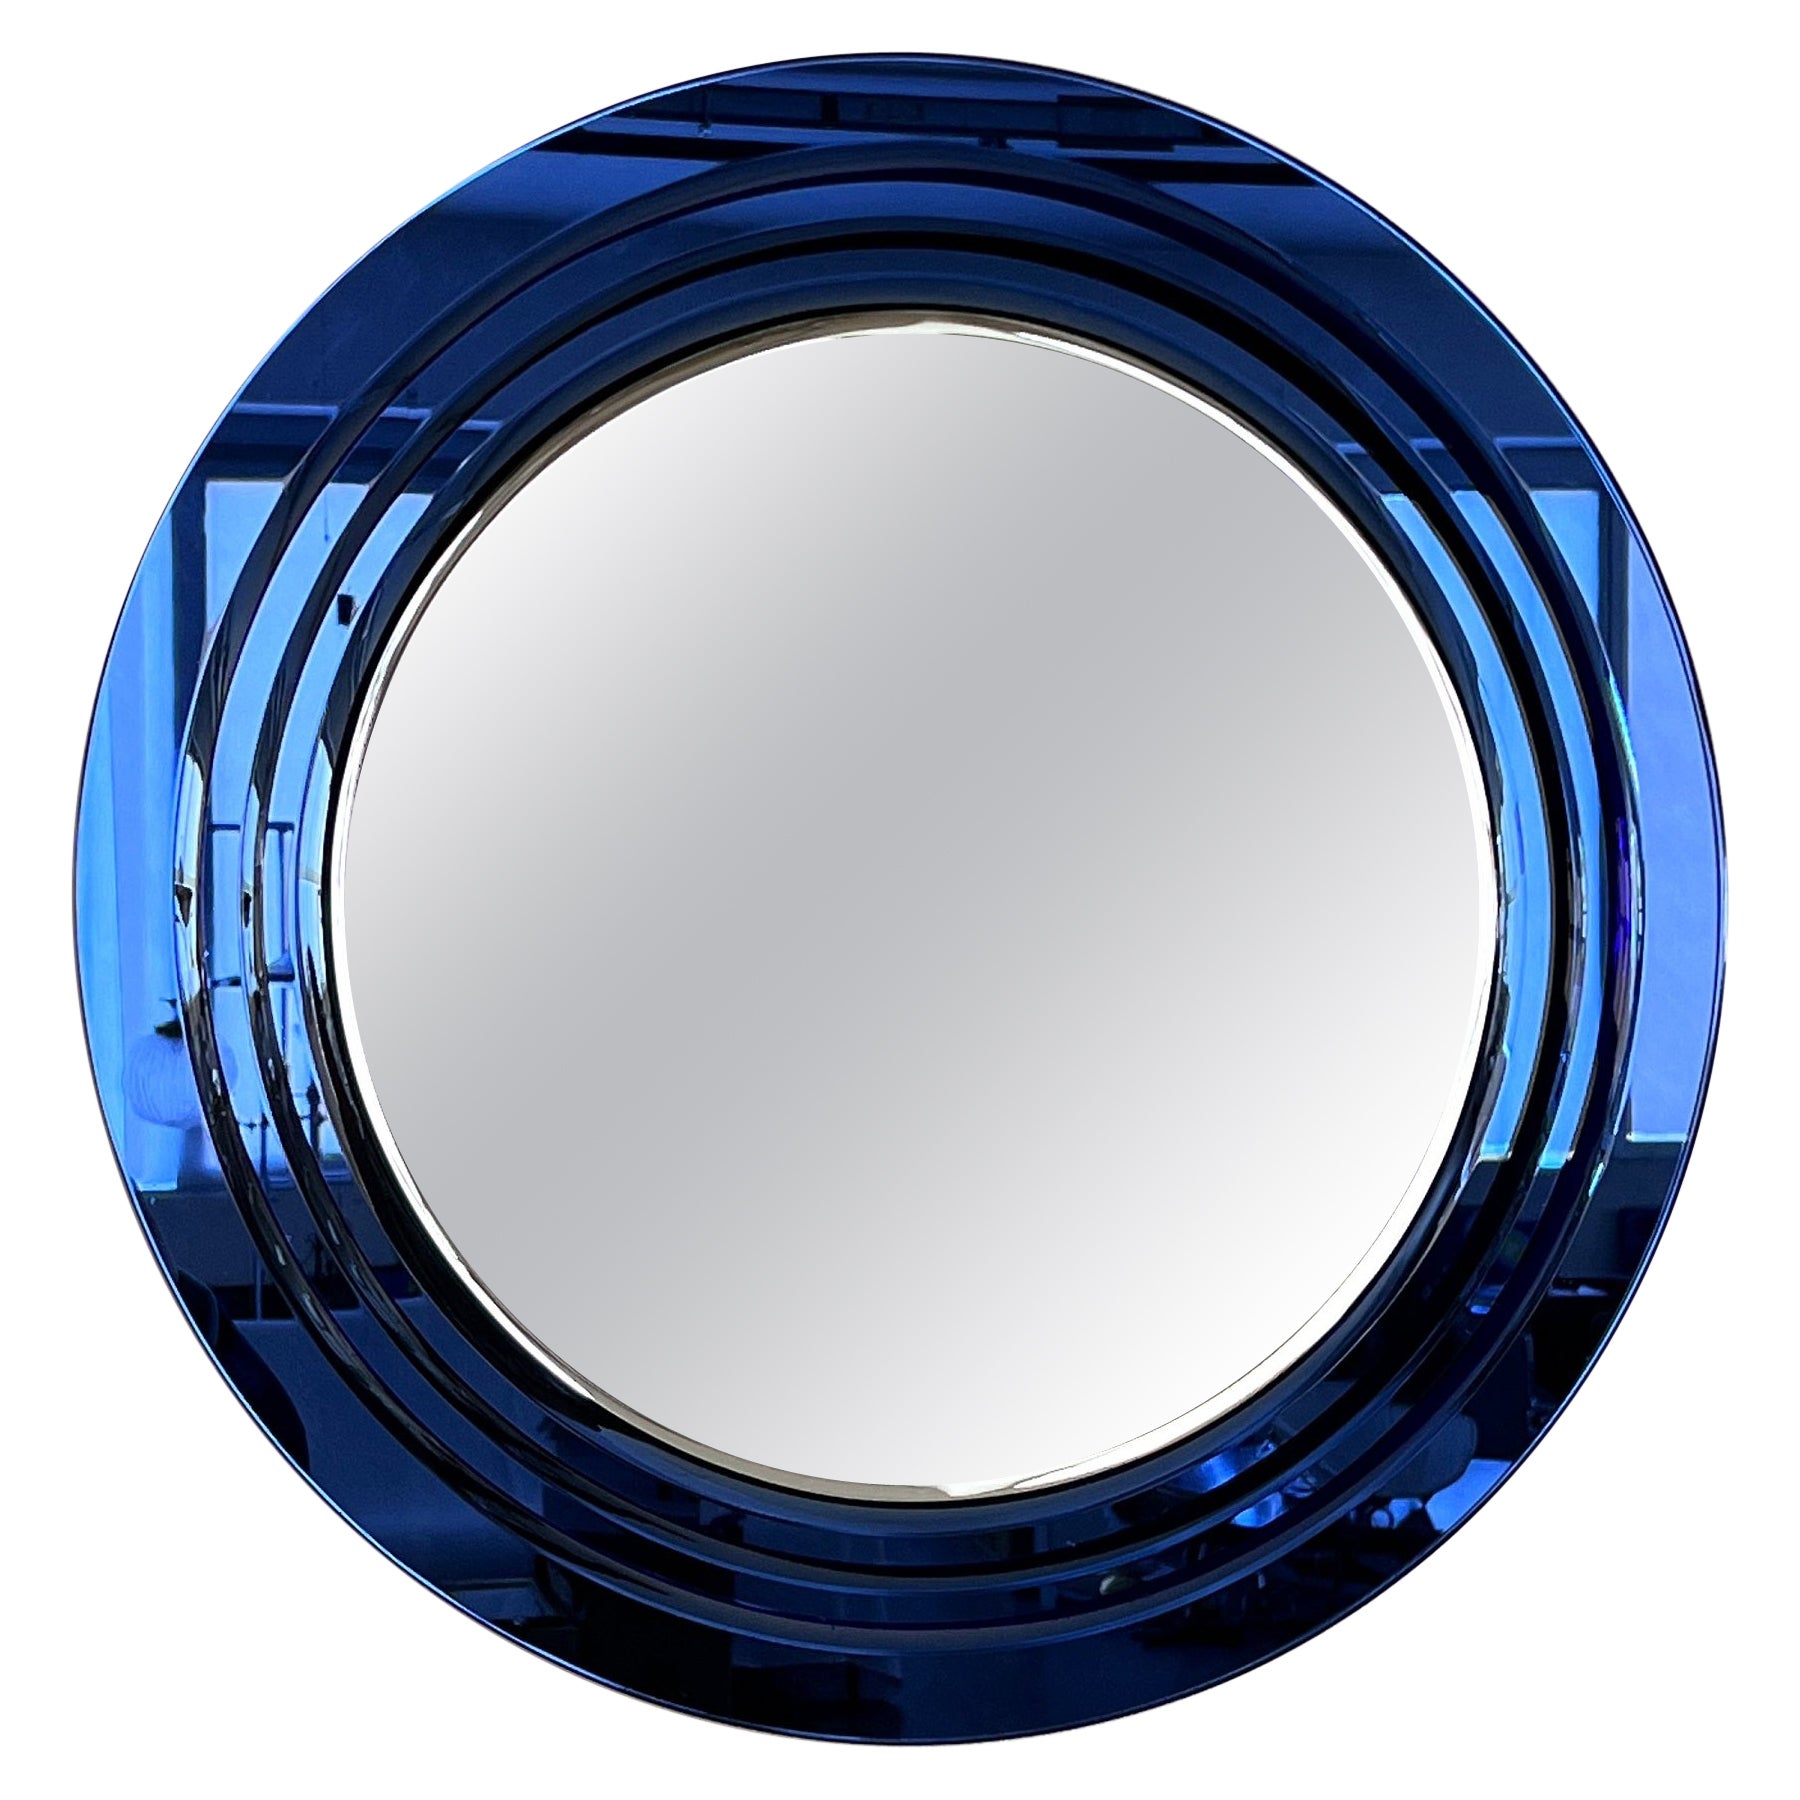 Italian Large Wall Mirror with 3 layers of Blue Cut Crystal Glass, 1970s